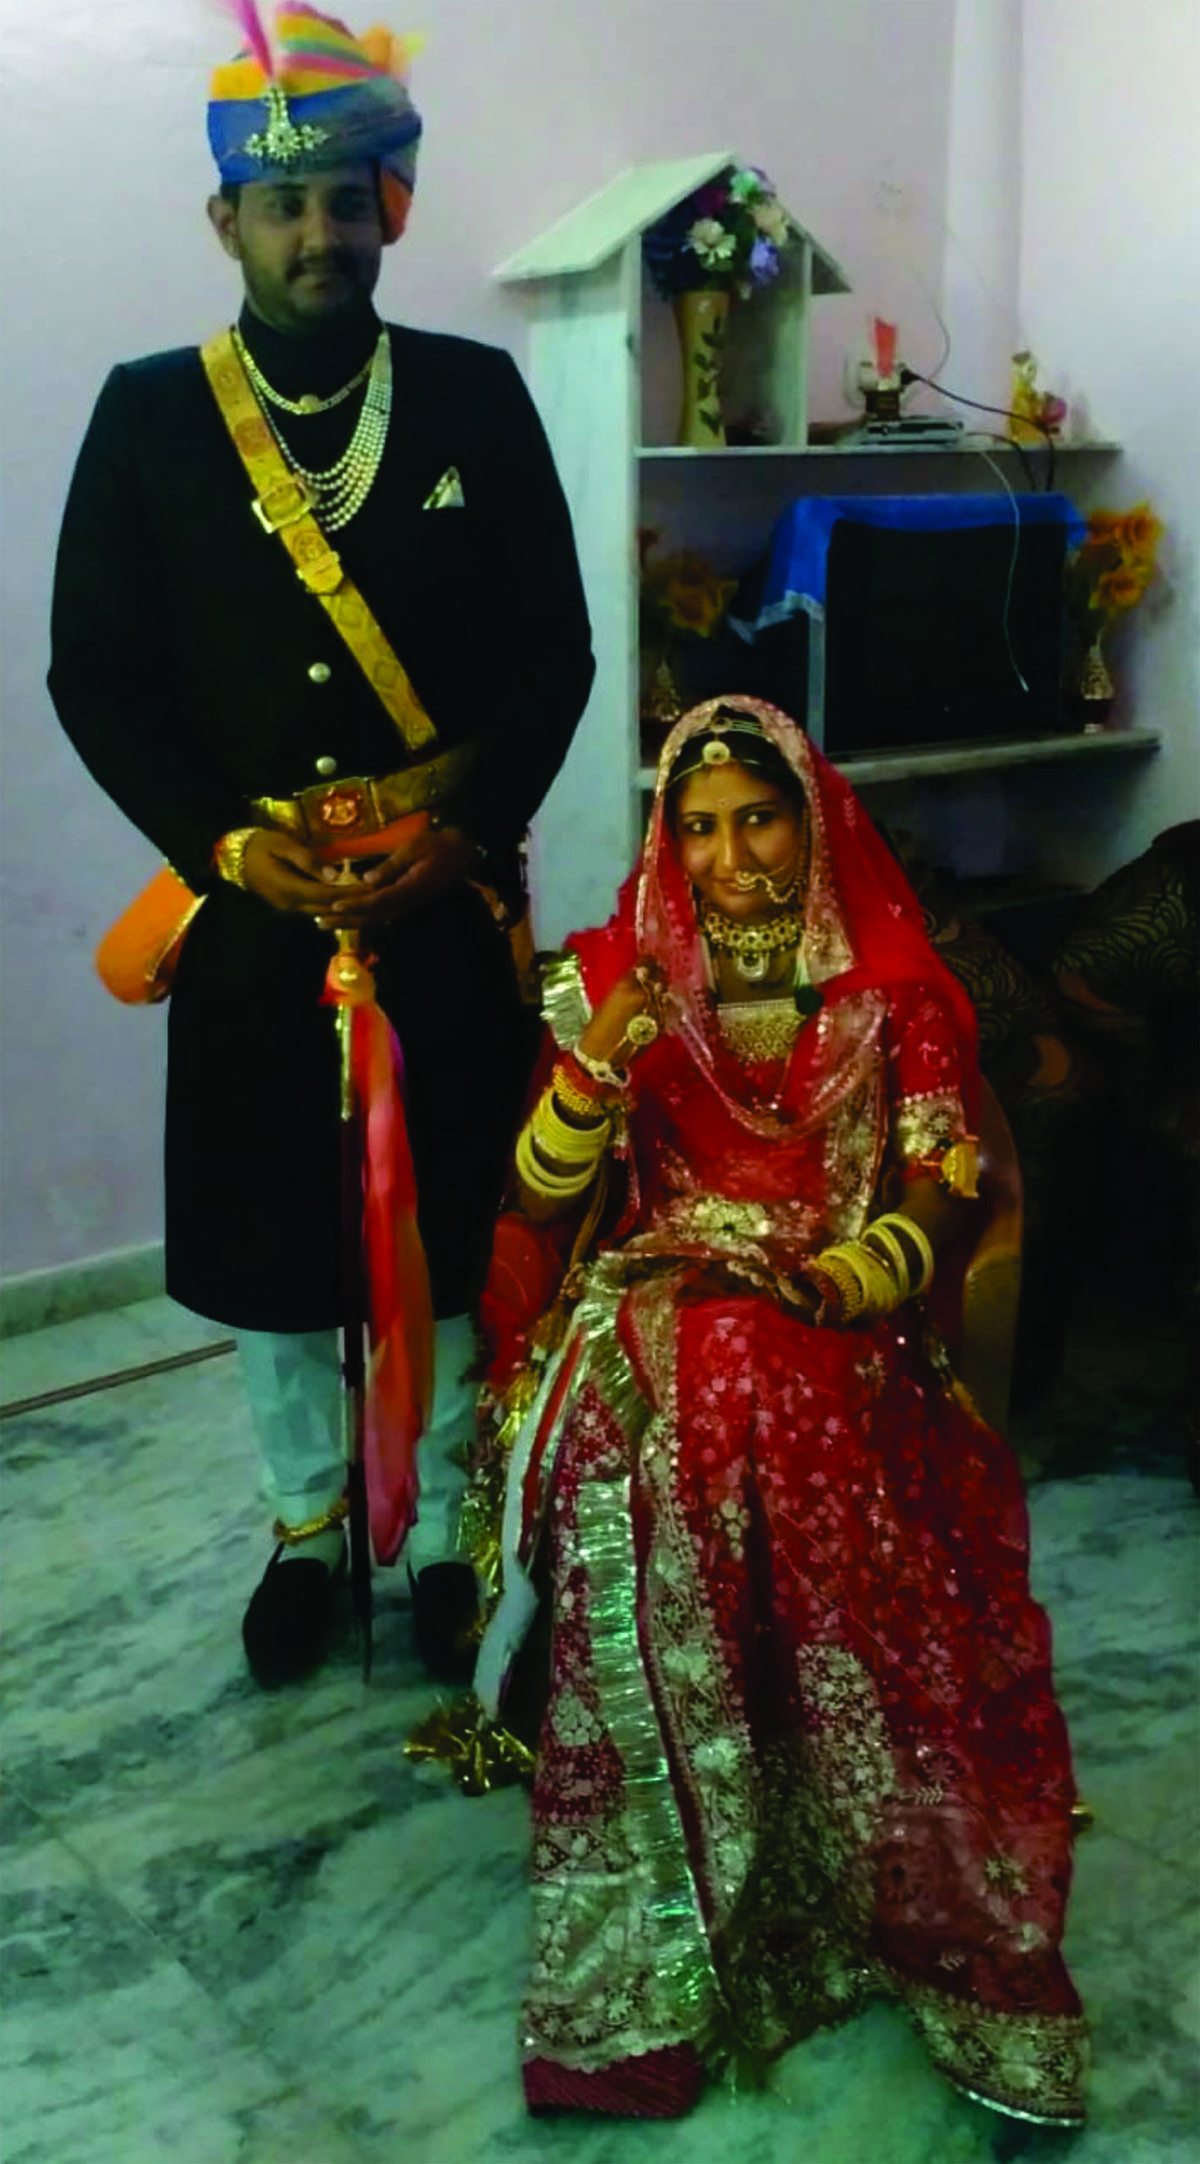 The groom deflected with dowry